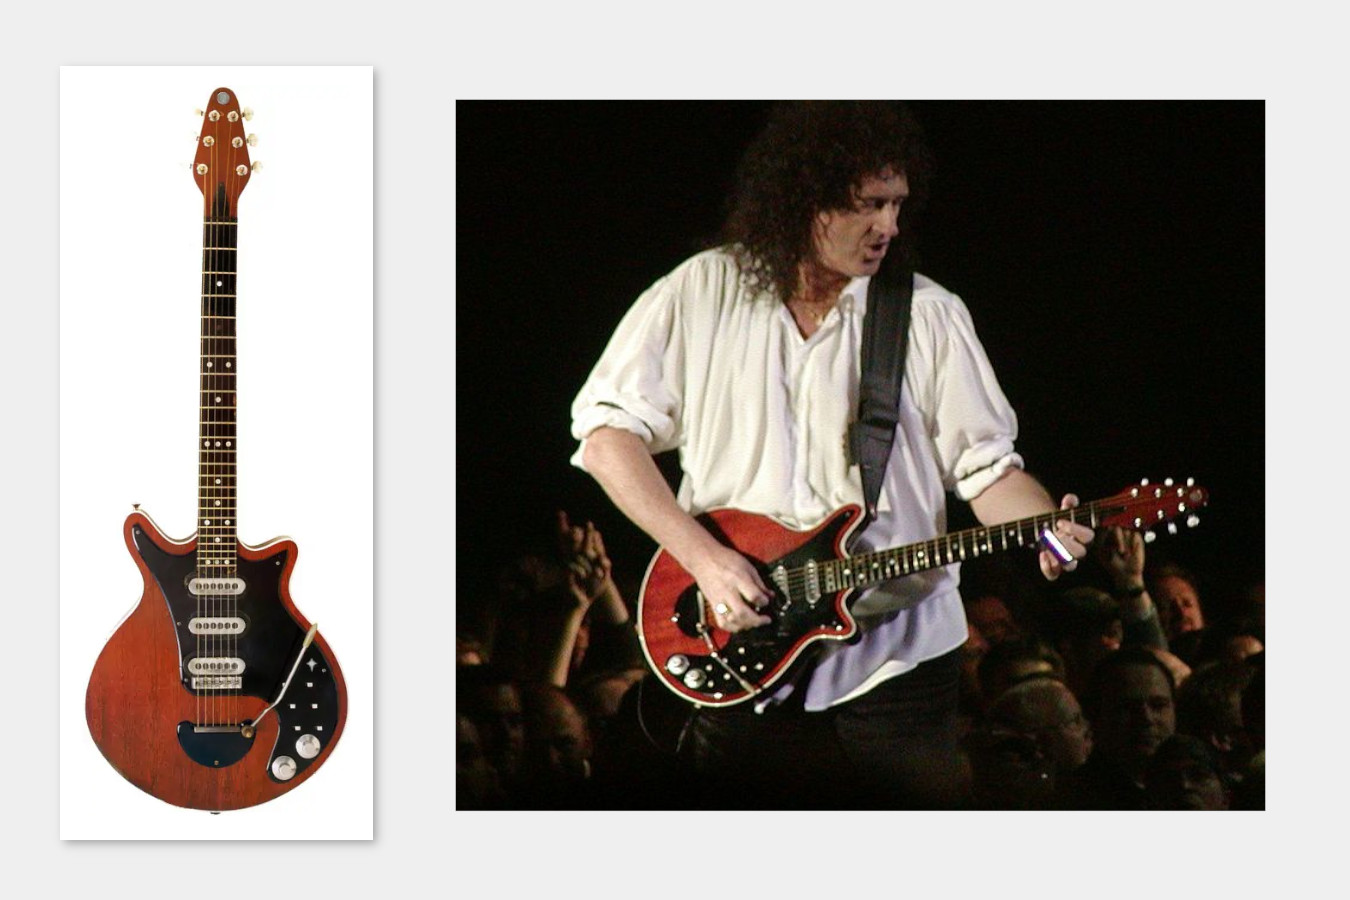 The "Red Special" - a guitar that Brian May built with his father in 1966, and used on every single Queen album.